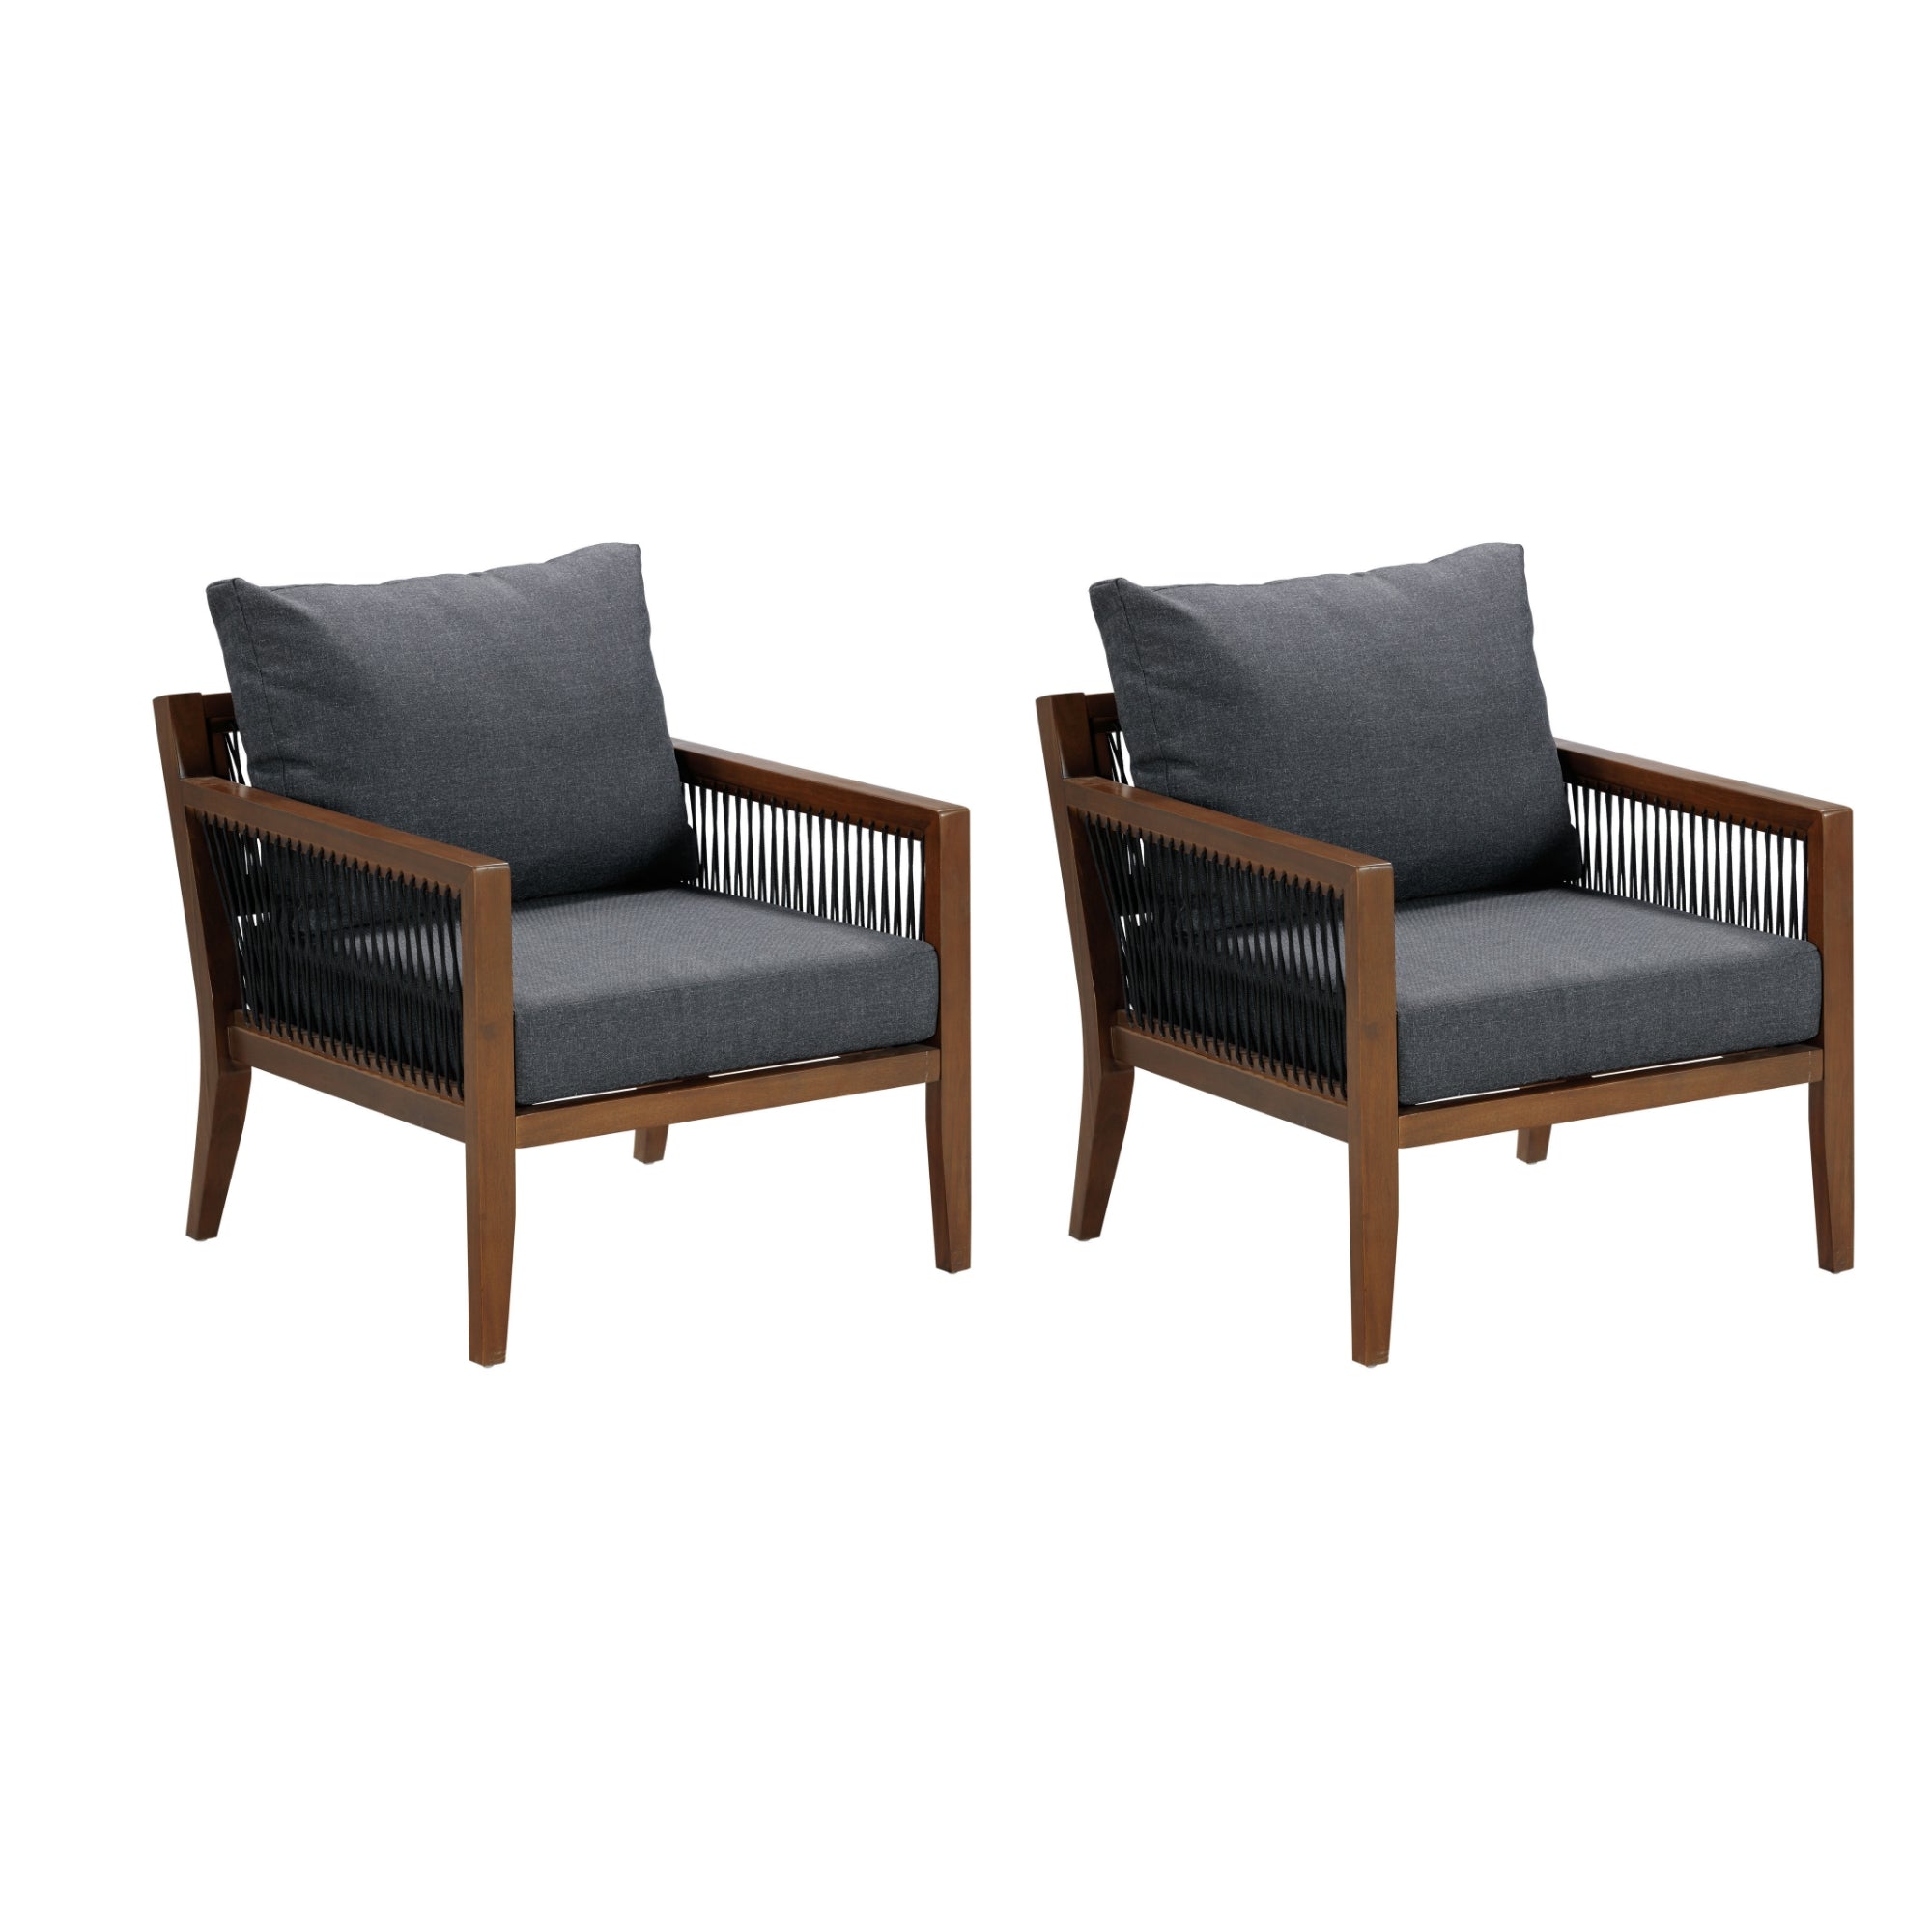 Set of 2 Outdoor Patio Arm Chairs Gray